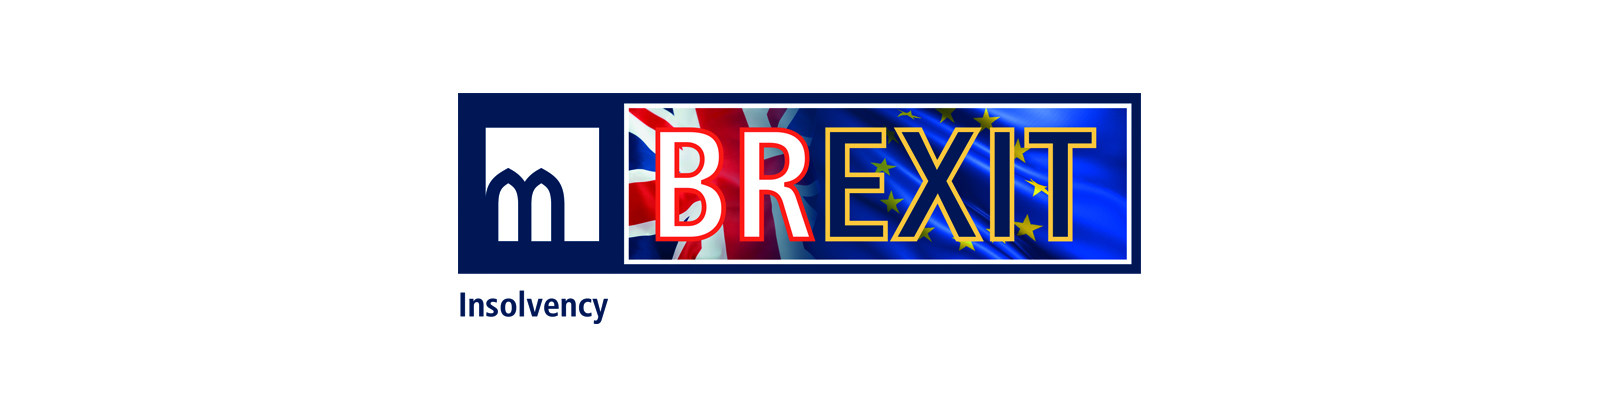 Preparing for Brexit – Insolvency